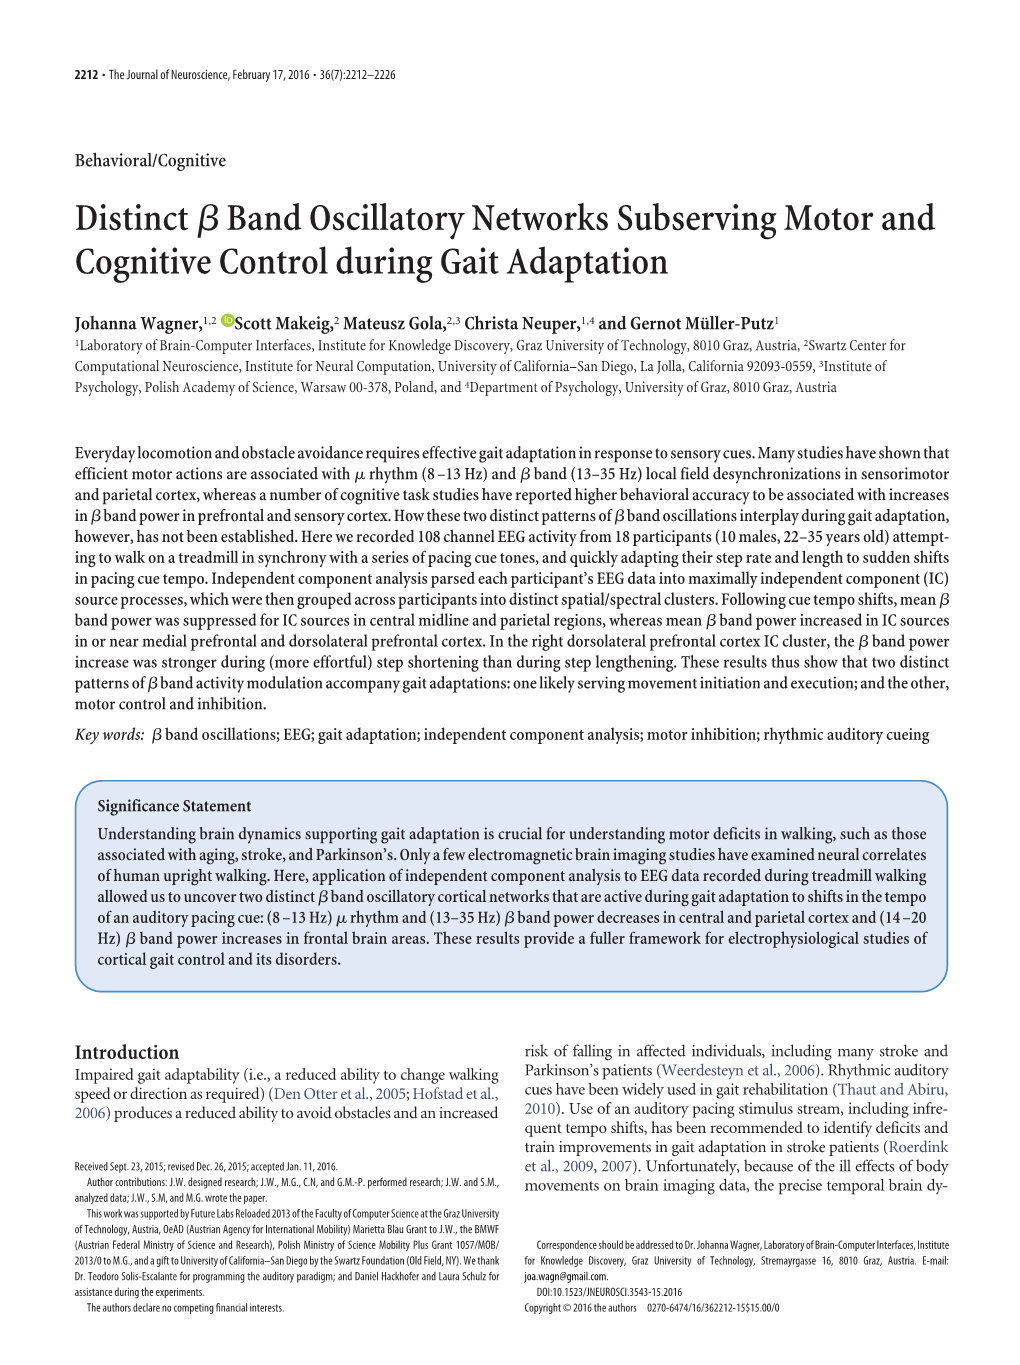 Distinct Β Band Oscillatory Networks Subserving Motor and Cognitive